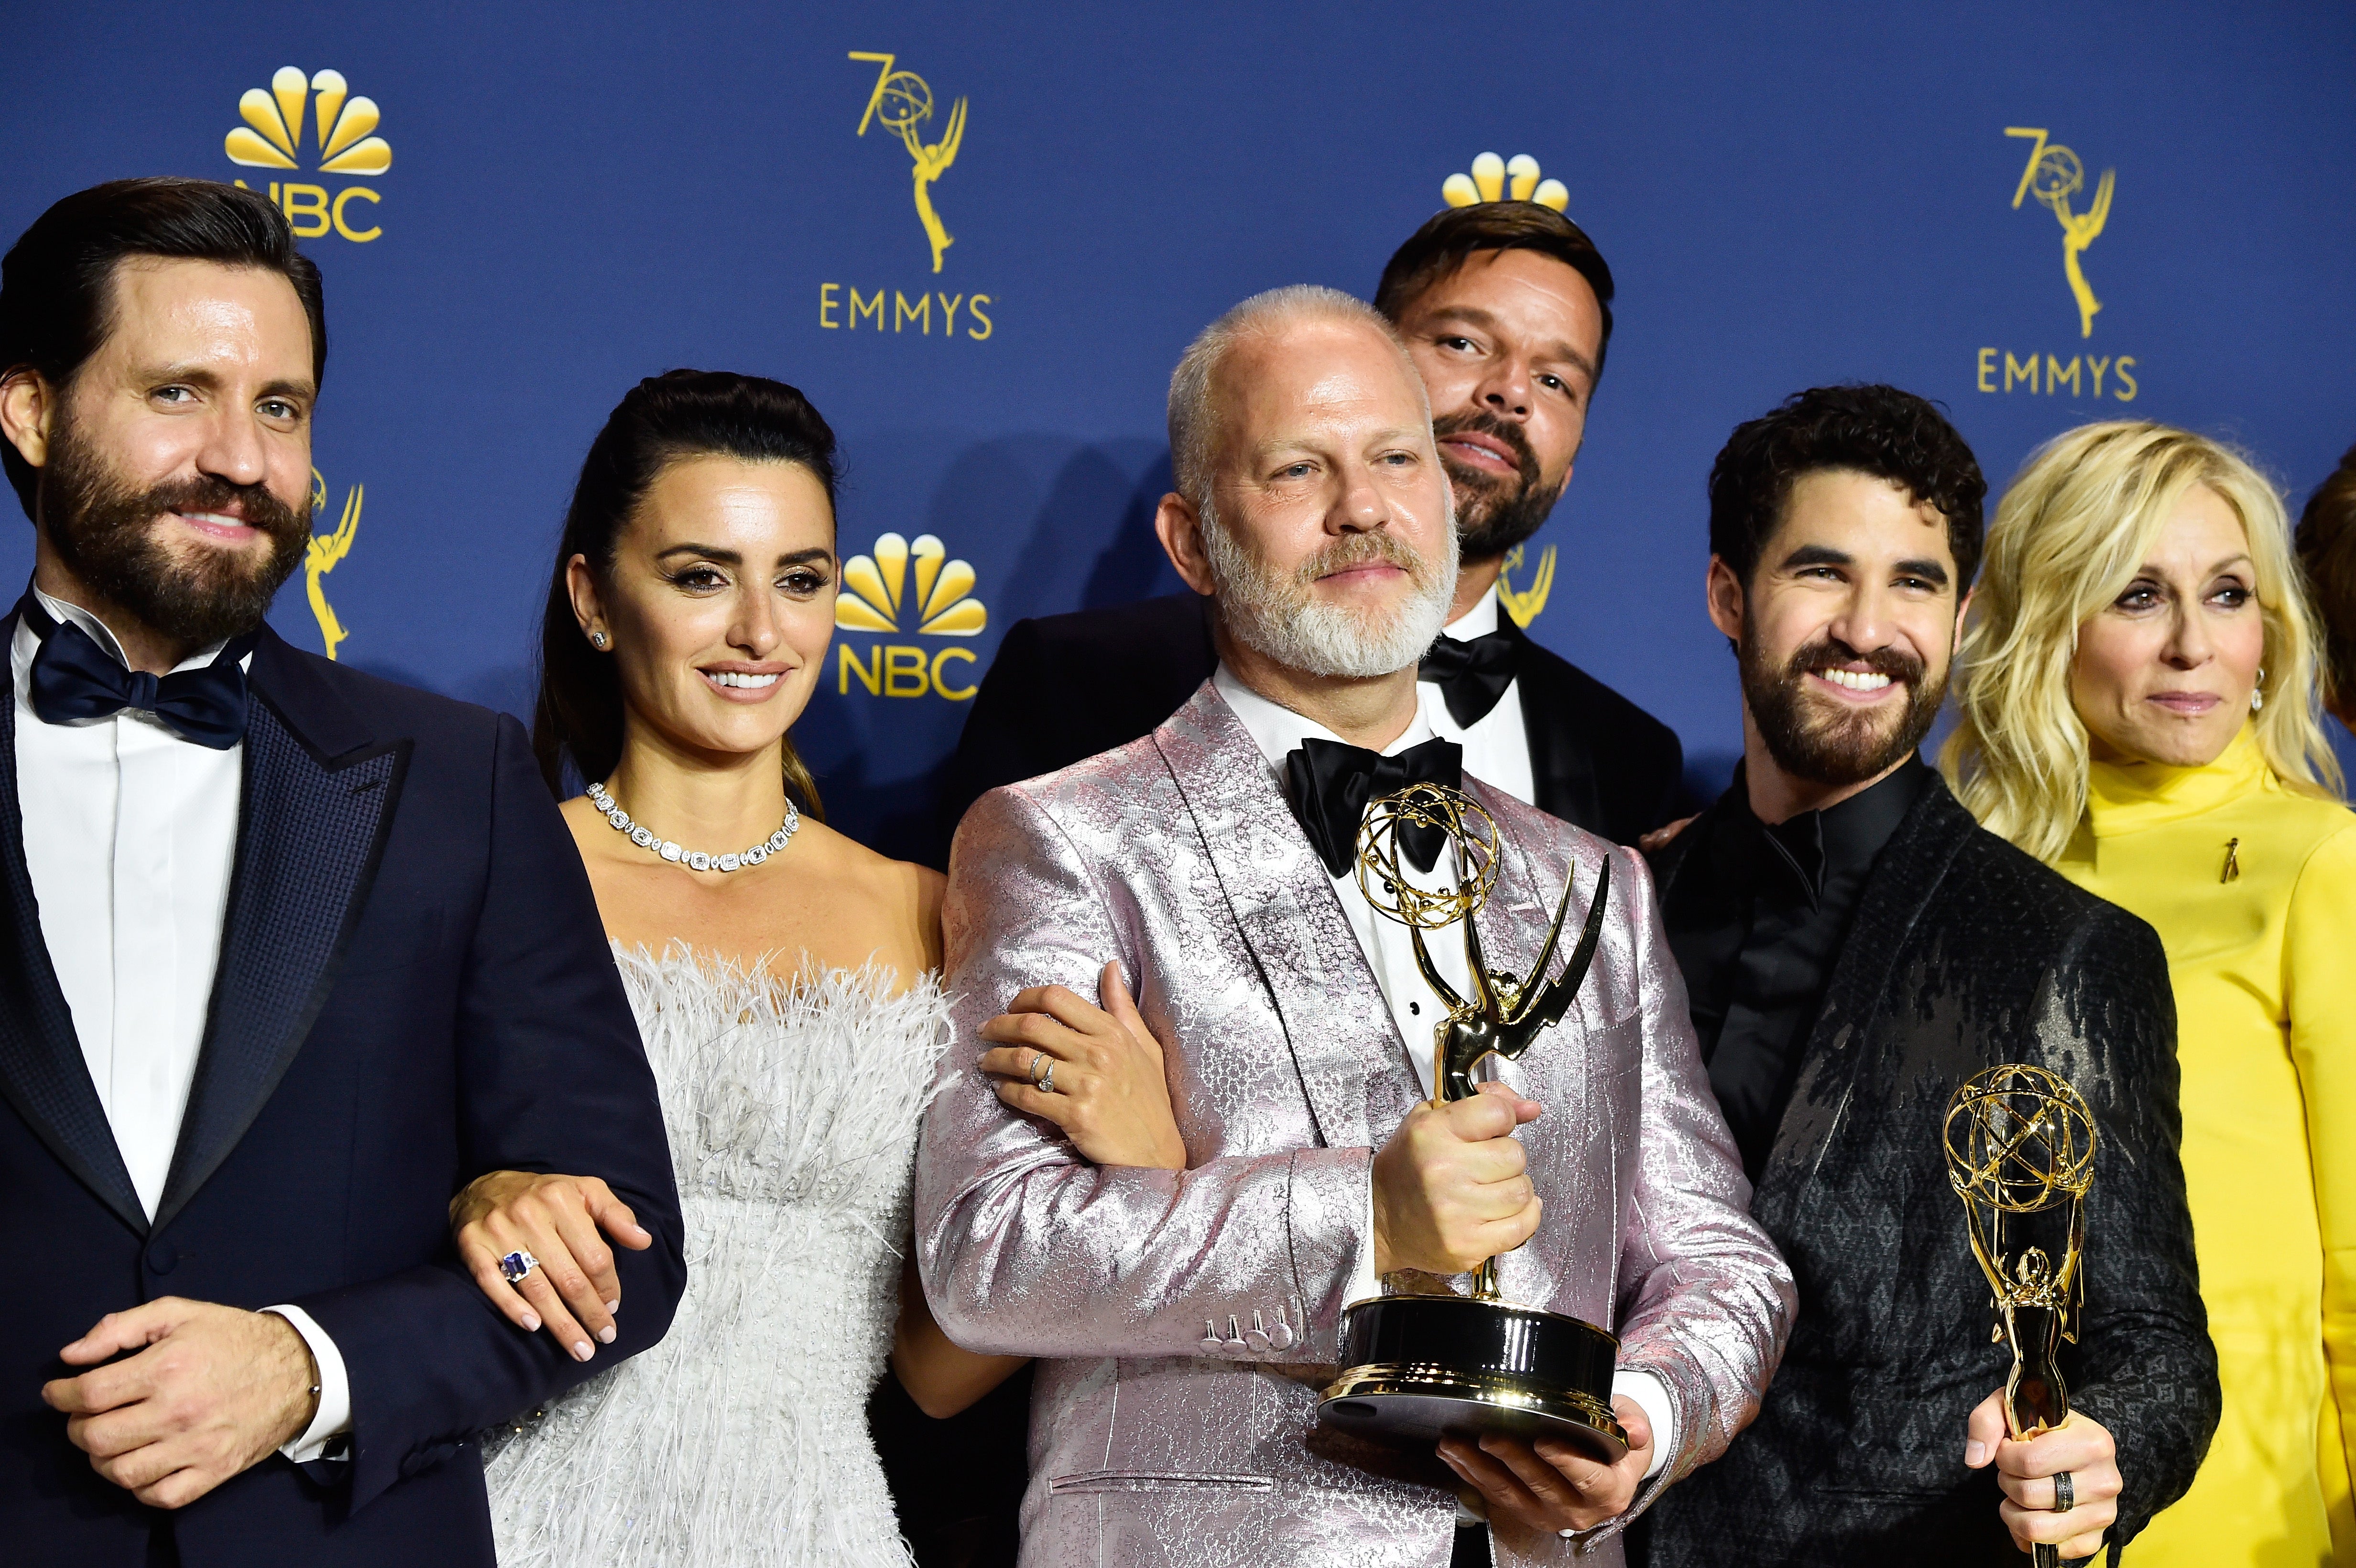 Emmys 2018: 'Game of Thrones' and 'Marvelous Mrs. Maisel' Win Big Awards -  The New York Times